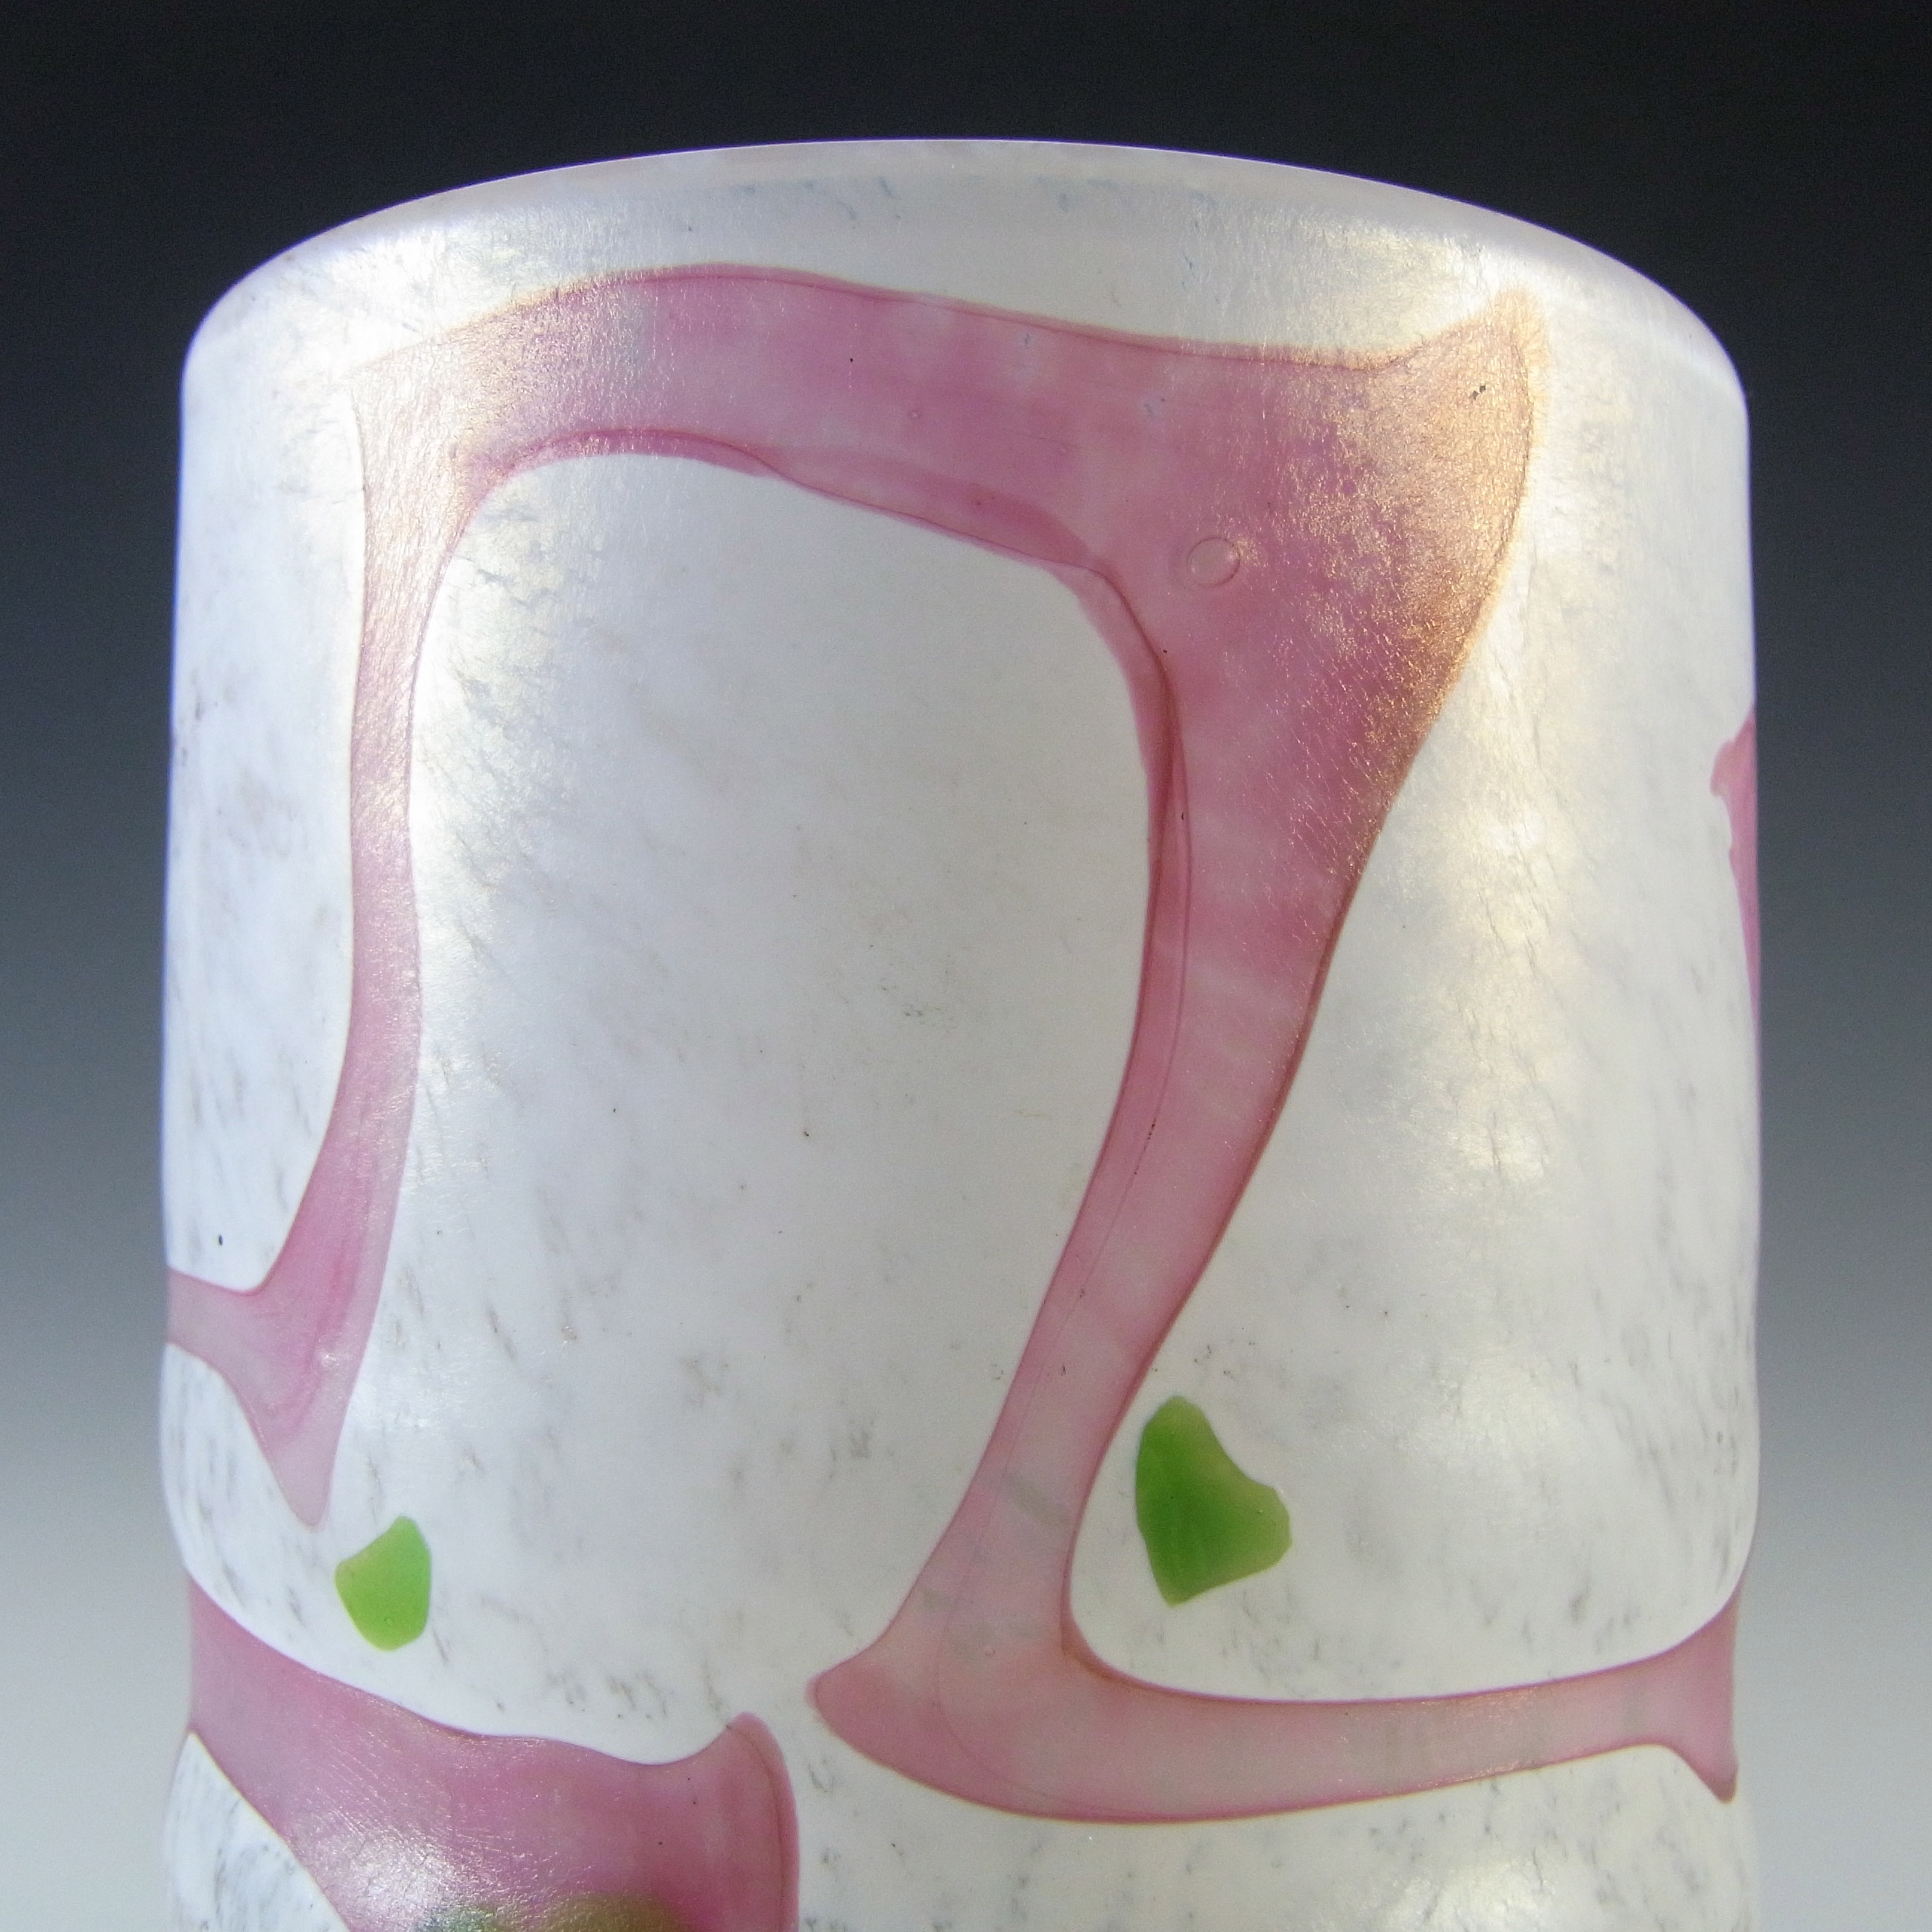 SIGNED Mtarfa Maltese Vintage Pink, Green & White Glass Vase - Click Image to Close